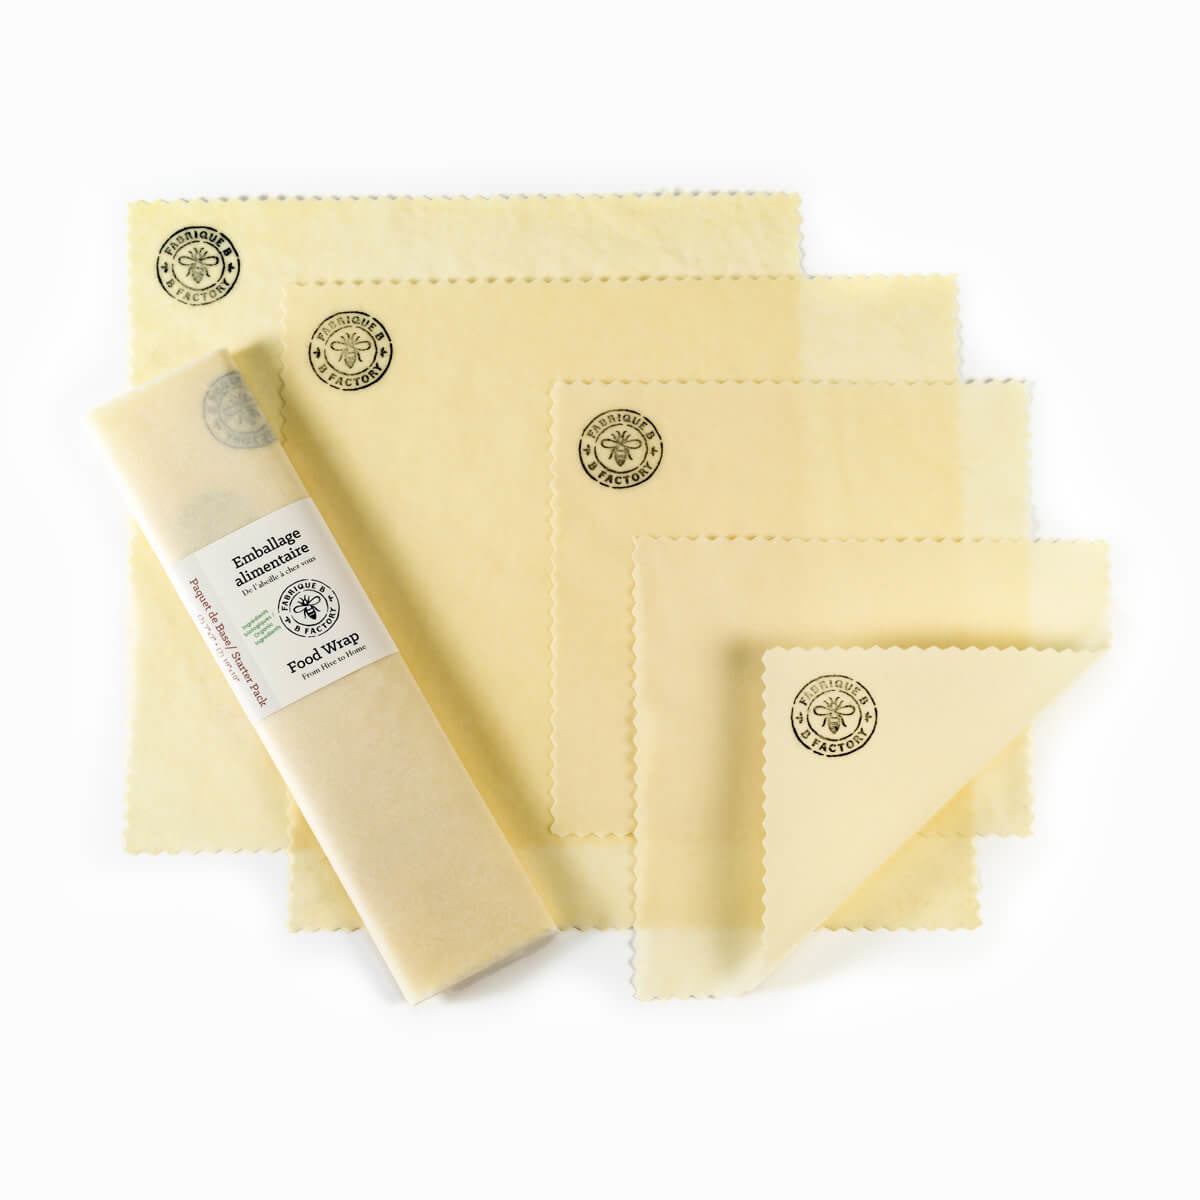 Pack of 4 reusable beeswax wraps with B Factory logo: 2 small beeswax wraps, 2 medium beeswax wraps